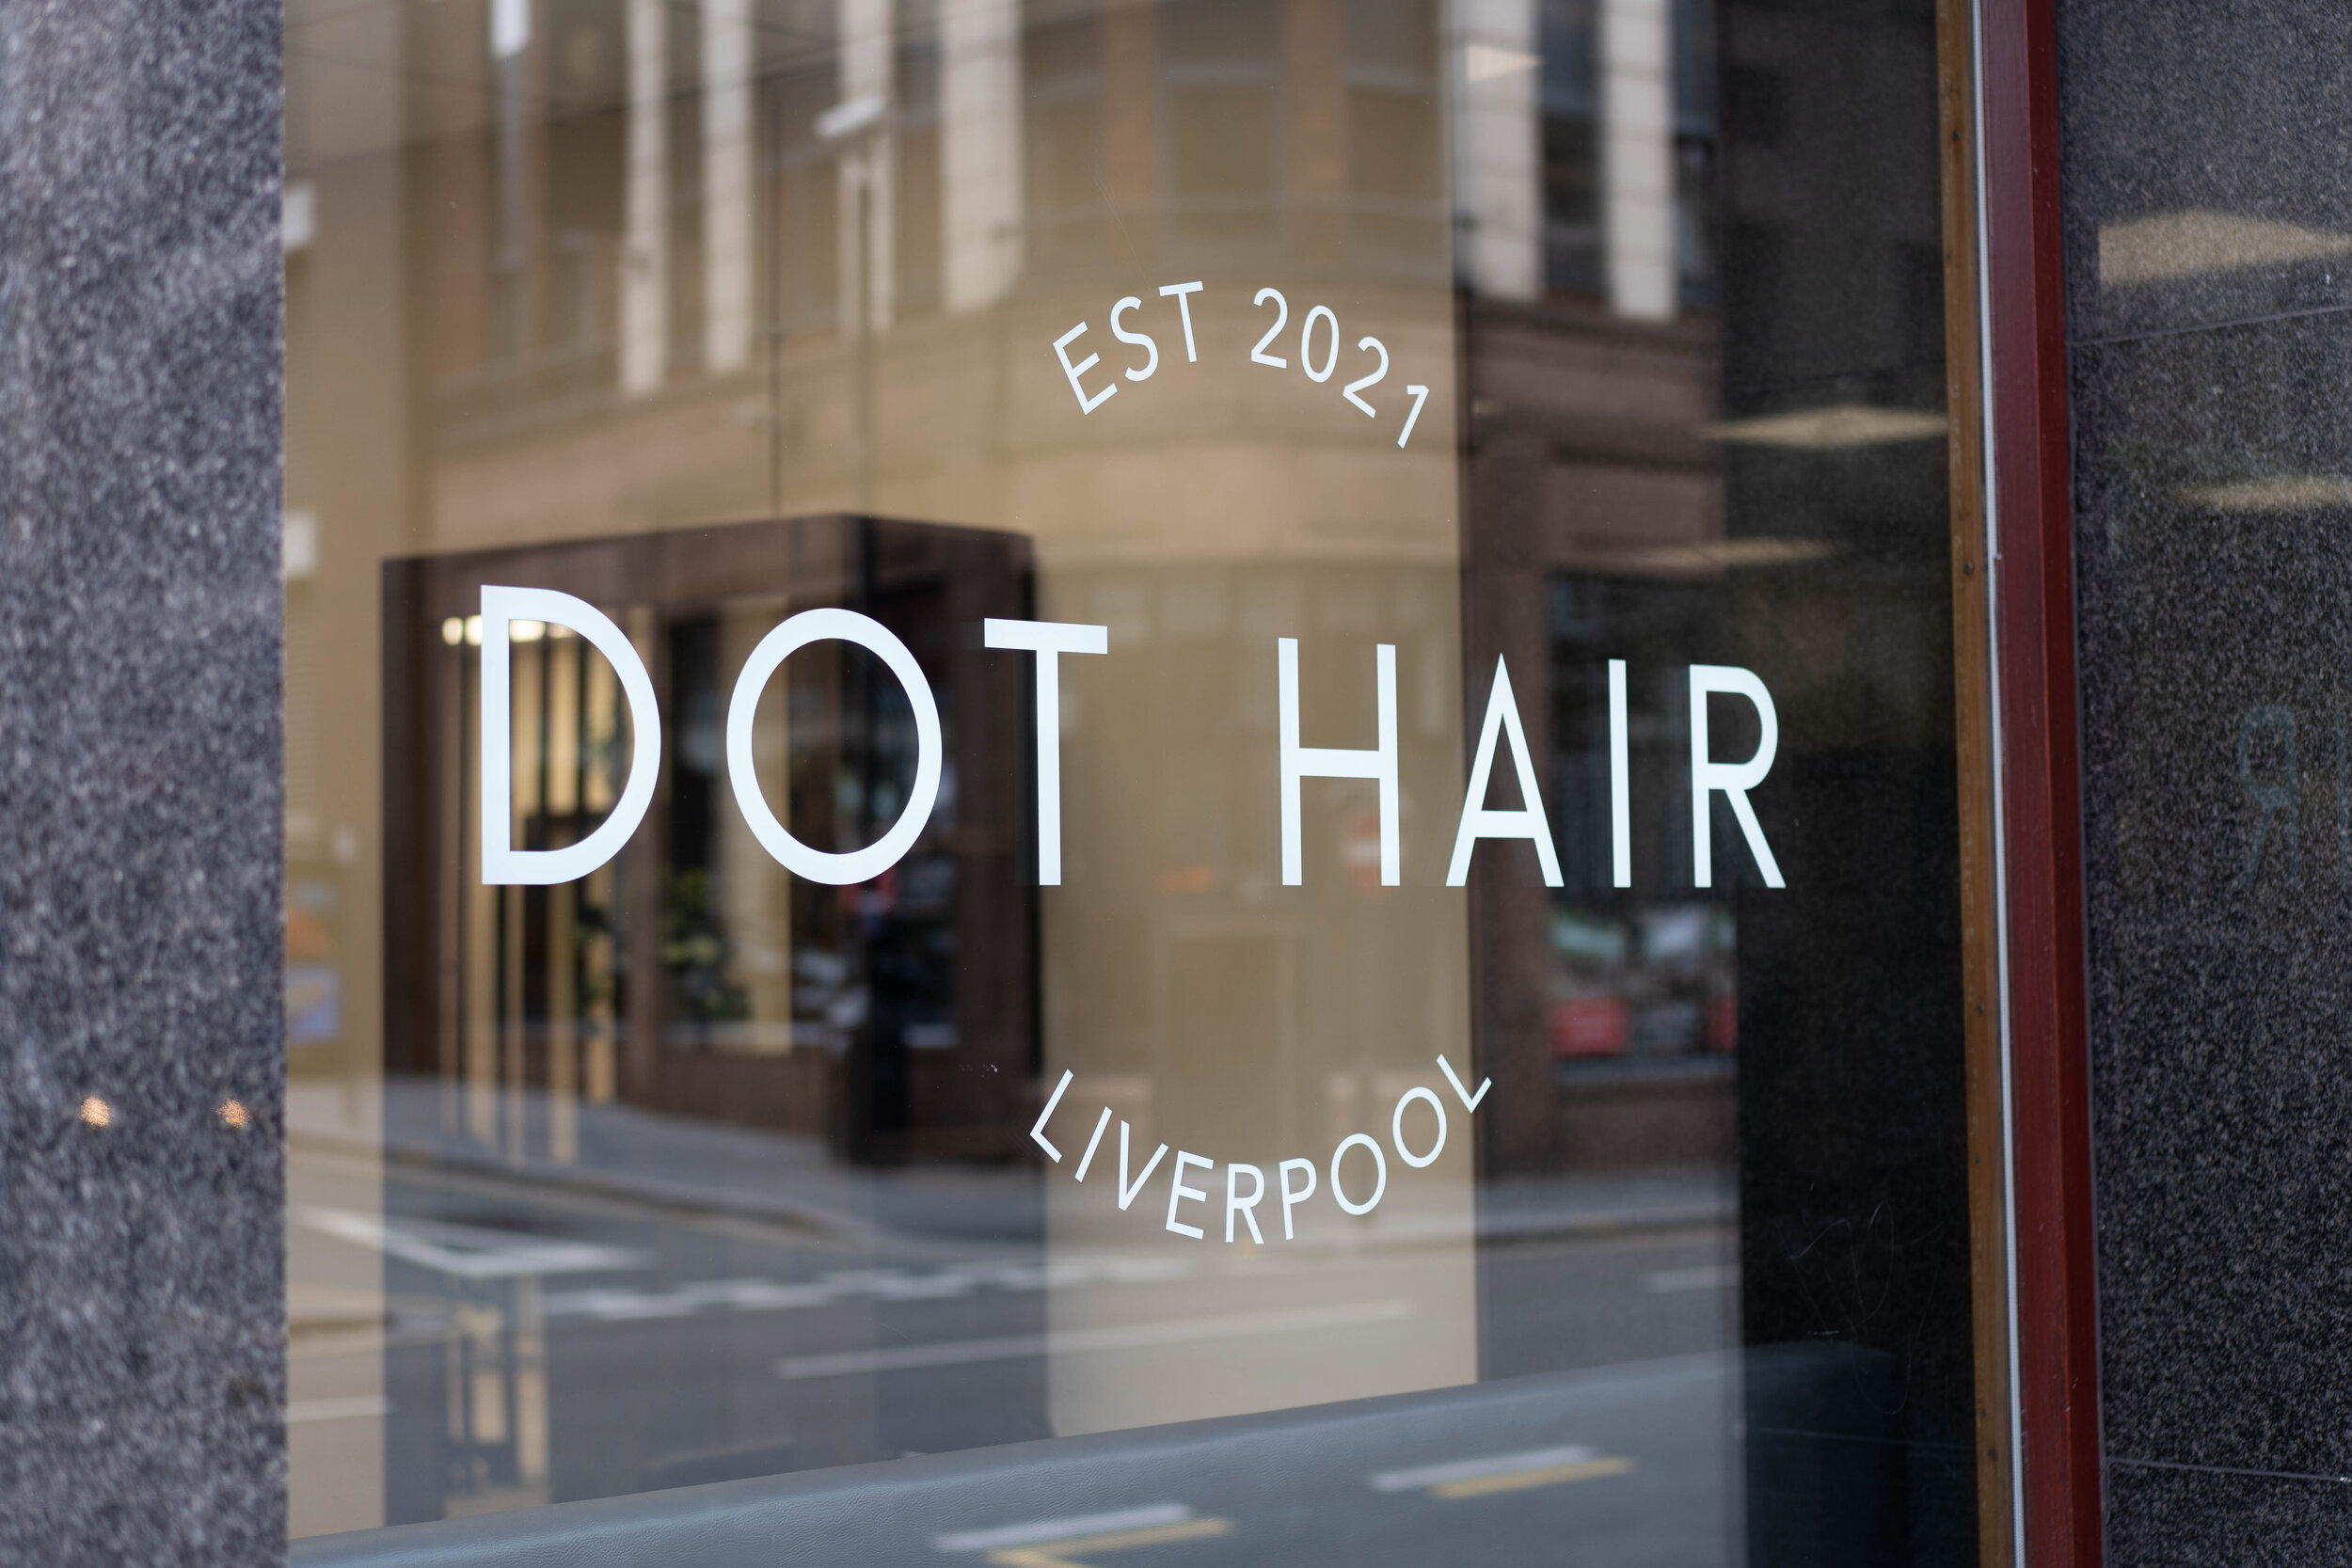 Welcome to Dot Hair